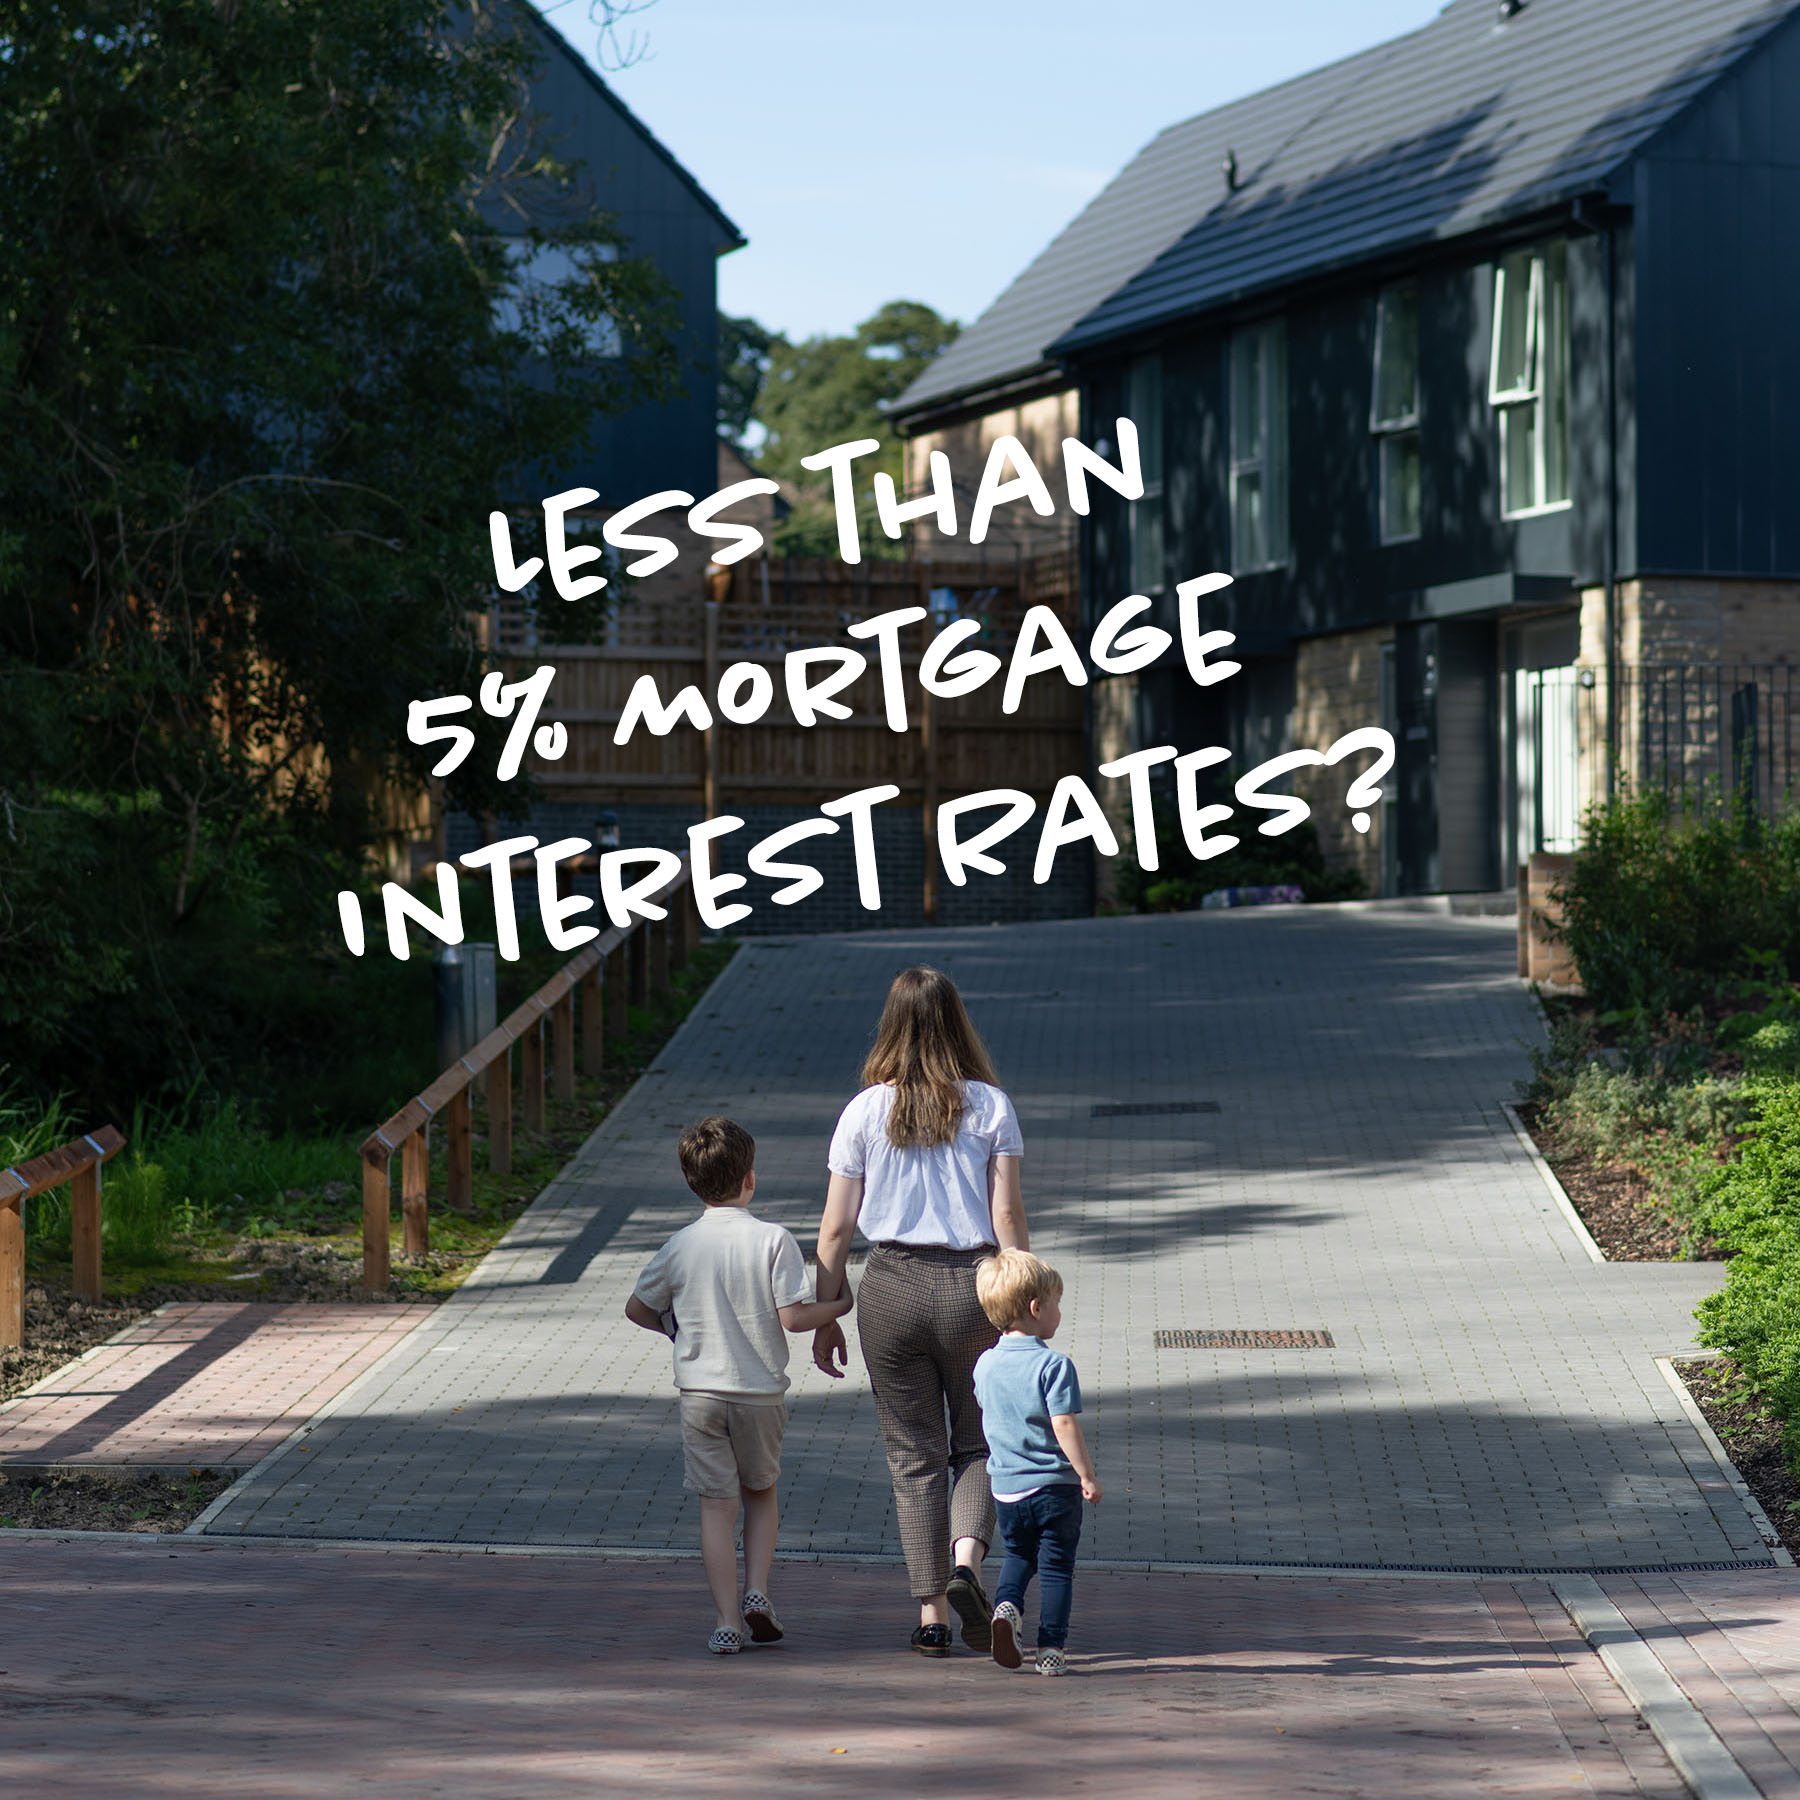 UK Mortgage Interest Rates Drop Below 5% - An Ideal Time to Buy a Home